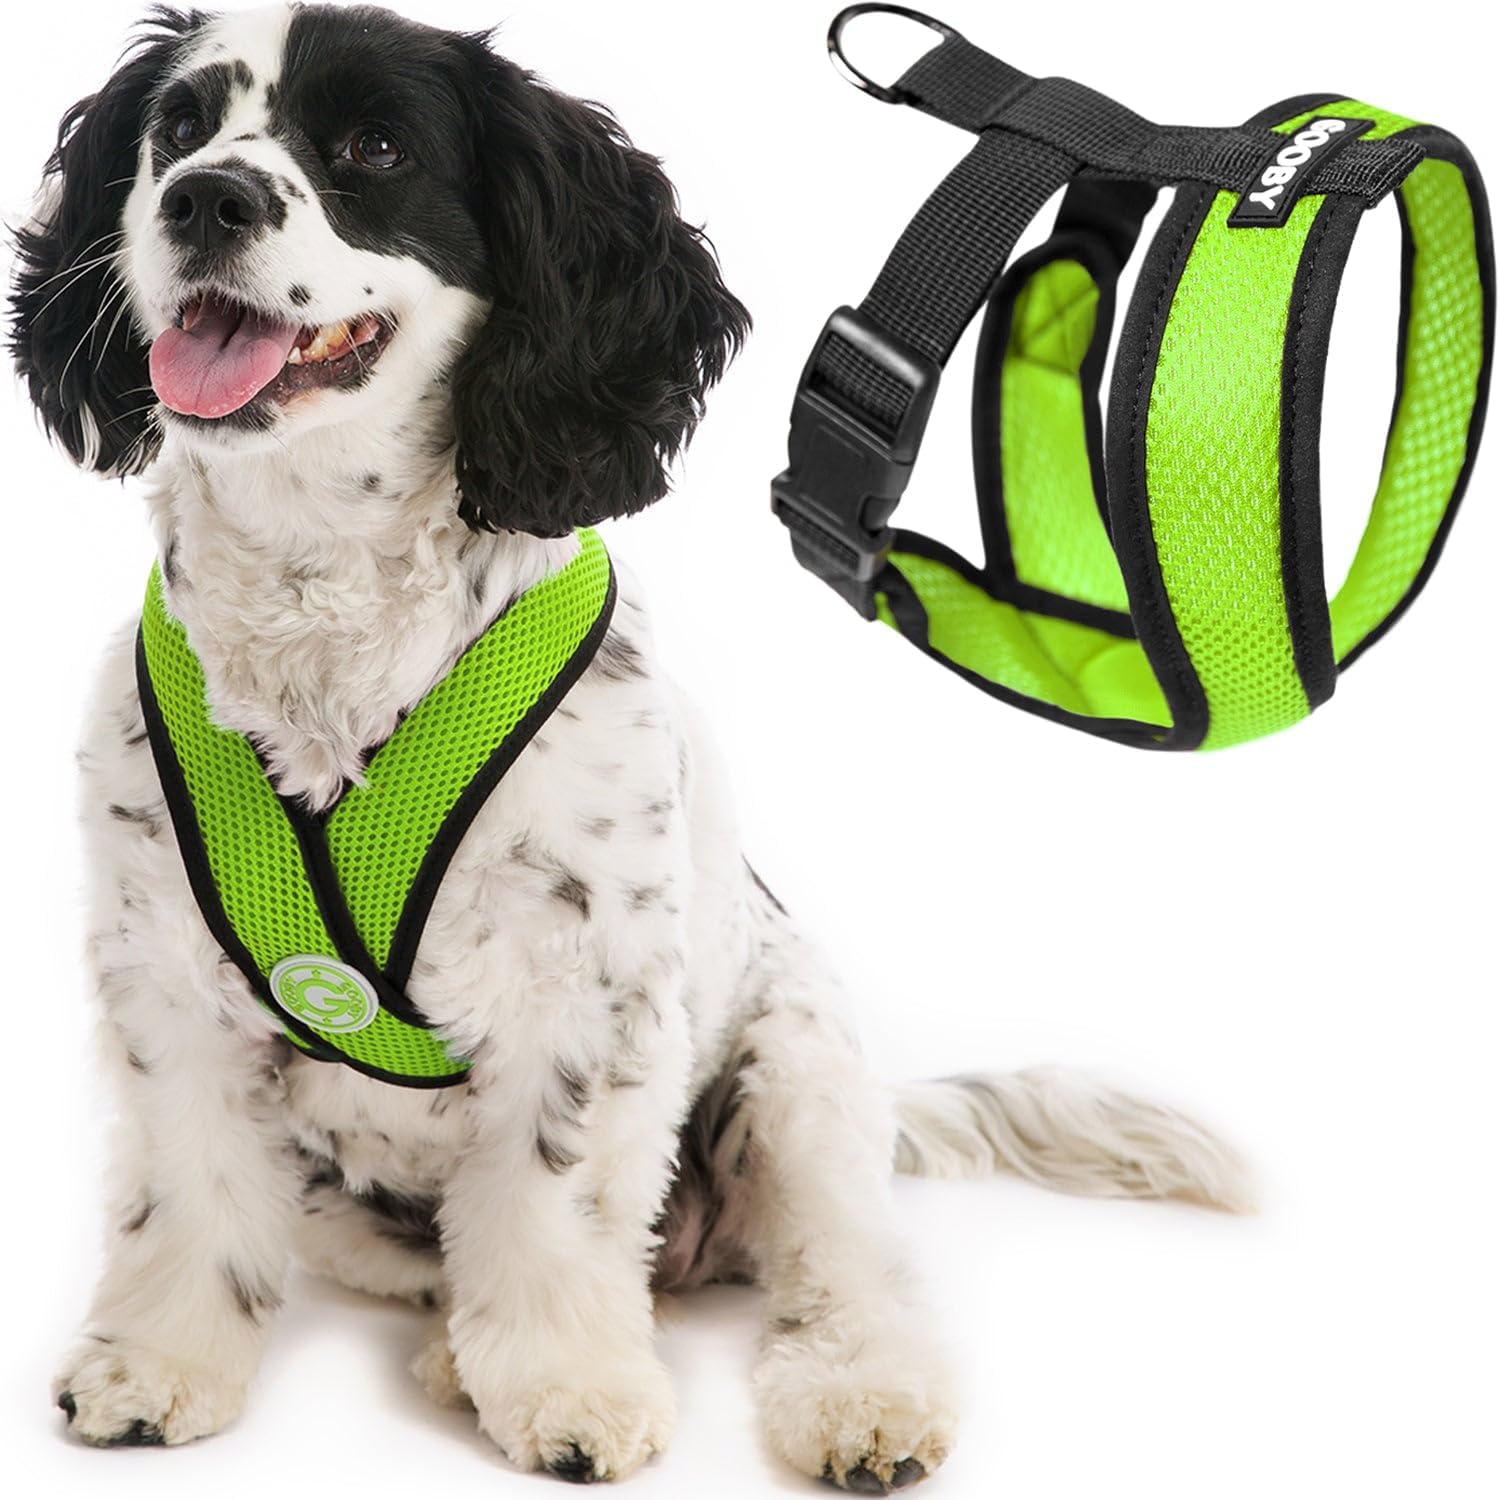 Gooby Comfort X Head In Harness - Blue, X-Large - No Pull Small Dog Harness Patented Choke-Free X Frame - Perfect on the Go Dog Harness for Medium Dogs No Pull or Small Dogs for Indoor and Outdoor Use